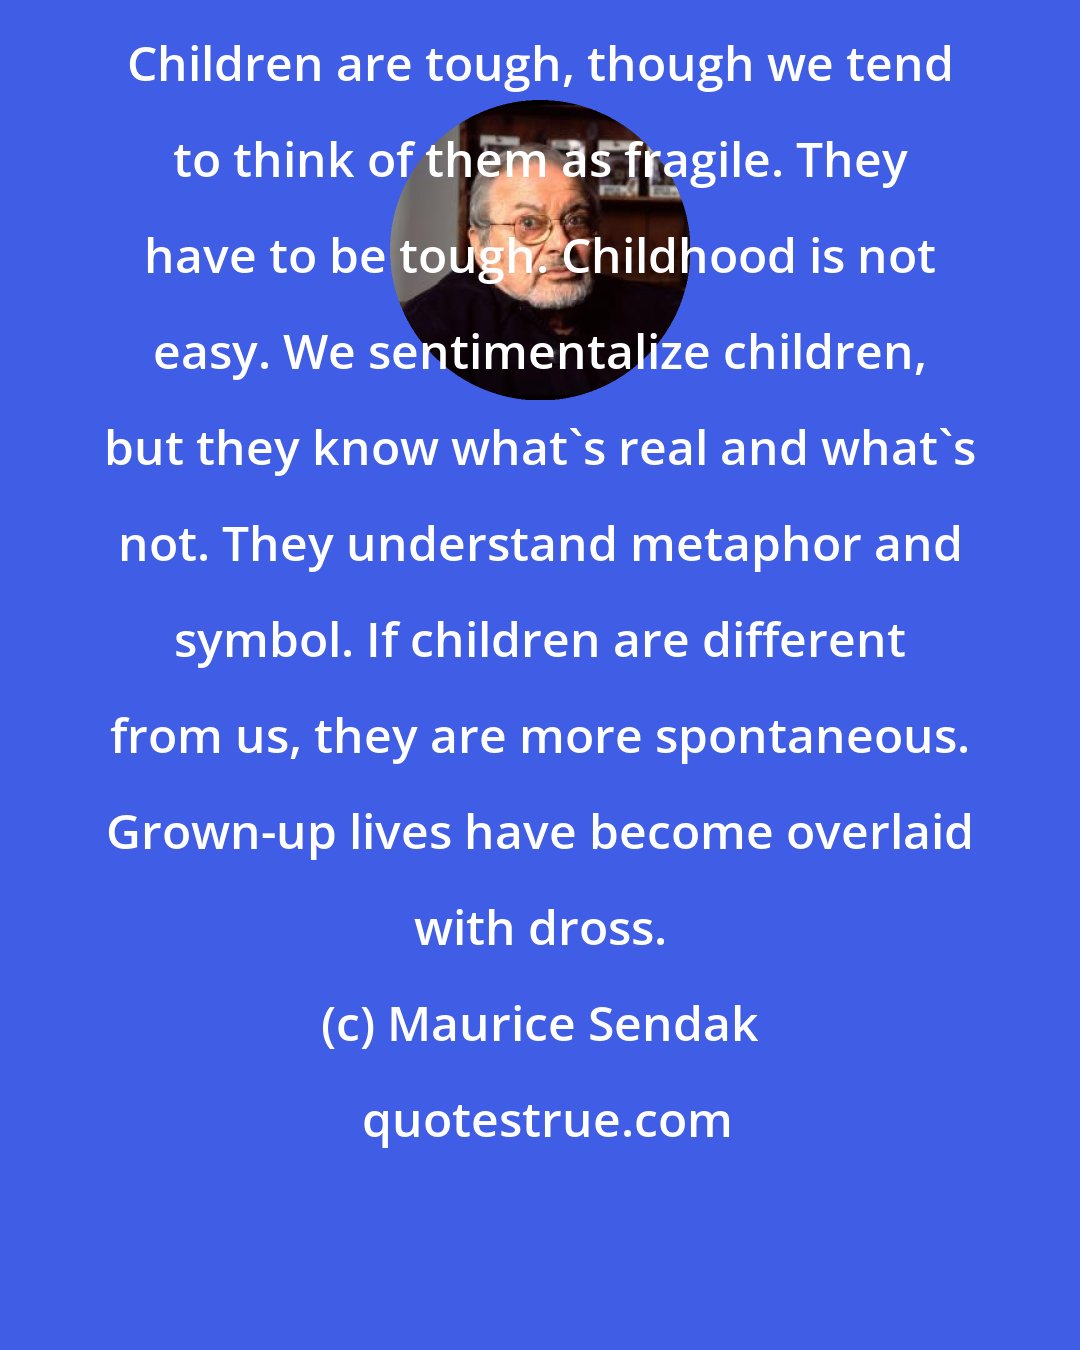 Maurice Sendak: Children are tough, though we tend to think of them as fragile. They have to be tough. Childhood is not easy. We sentimentalize children, but they know what's real and what's not. They understand metaphor and symbol. If children are different from us, they are more spontaneous. Grown-up lives have become overlaid with dross.